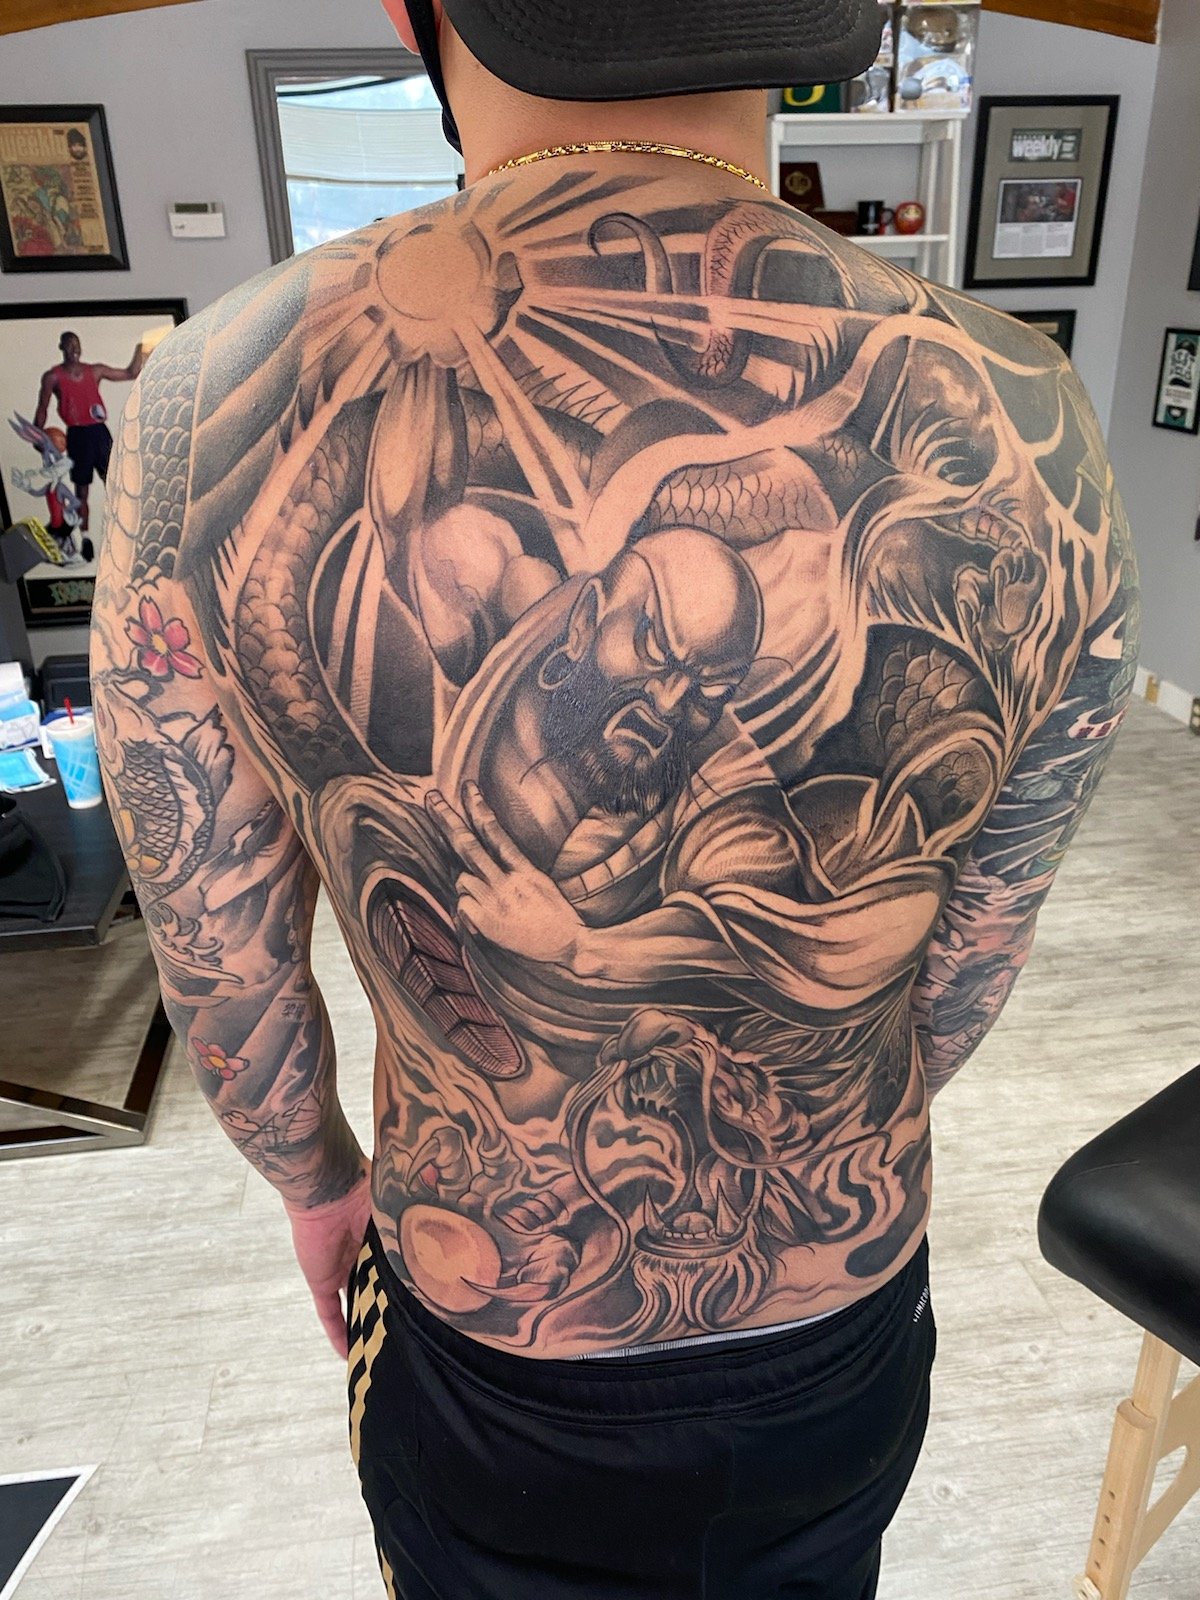 Puedmag Inkpire on Twitter Archangel Saint Michael as painted by Peter  Paul Rubens done by Luis here at Puedmag Inkpire Tattoo Shop Toronto   Whats Under Your Clothes httpstcoehbYiwm7rp  Twitter